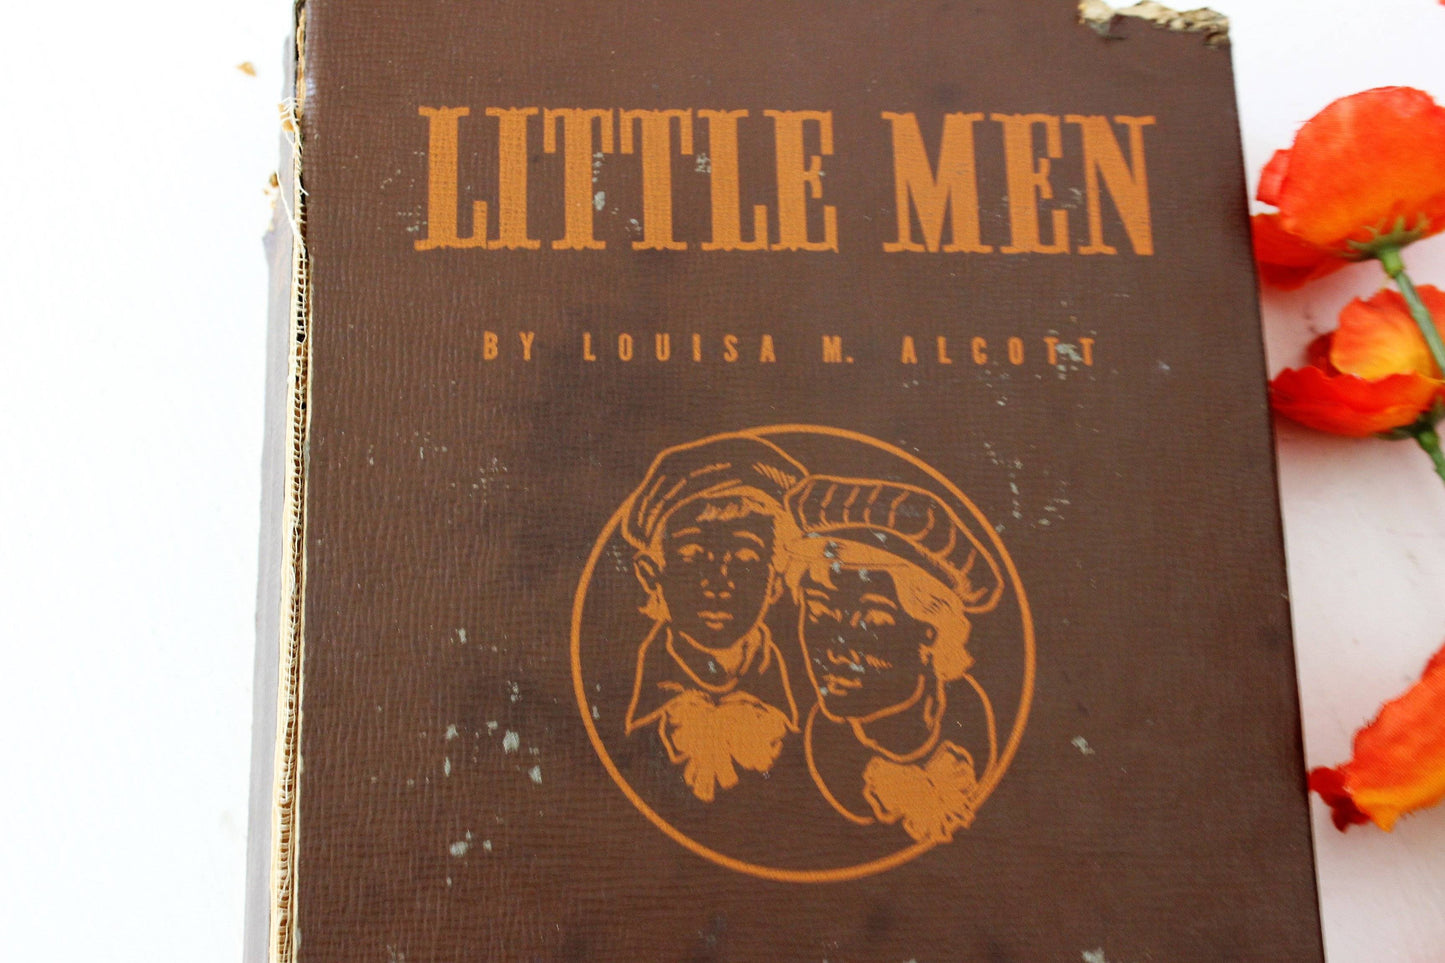 Vintage Book "Little Men" by Louisa May Alcott, 1940-Mint Chips Vintage Home Goods-1940,Classic Book,hardback Book,Literature,Little men,Louisa May Alcott,Old Book,Vintage,Vintage Book